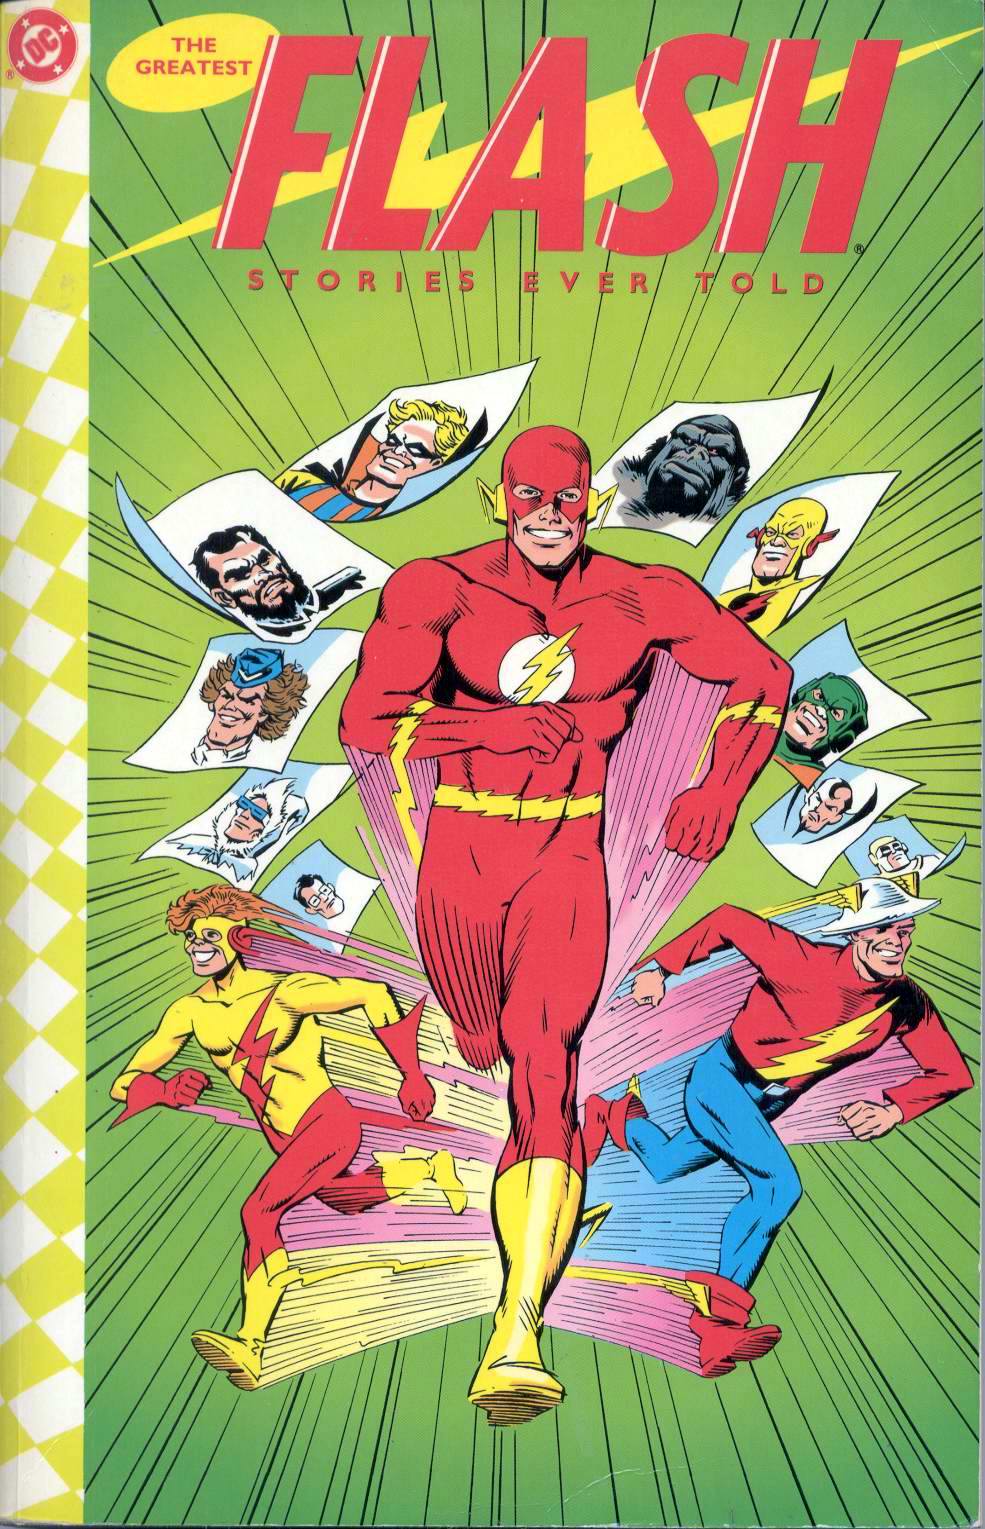 Read online The Greatest Flash Stories Ever Told comic -  Issue # TPB - 1